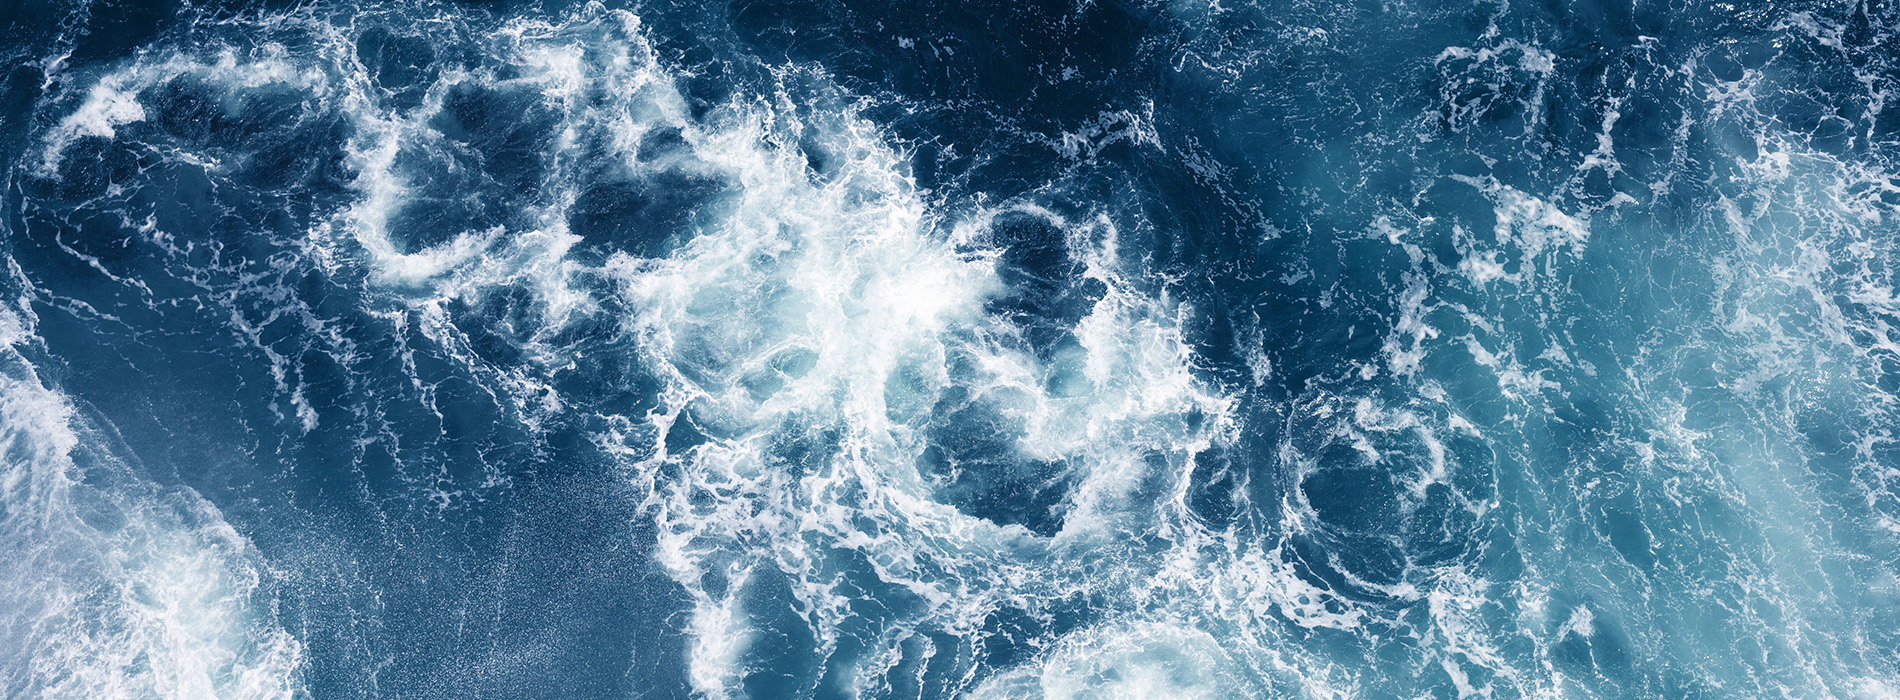 The image shows a close-up of ocean waves with the horizon line visible, creating a contrast between the rough texture of the water and the smoothness of the sky.